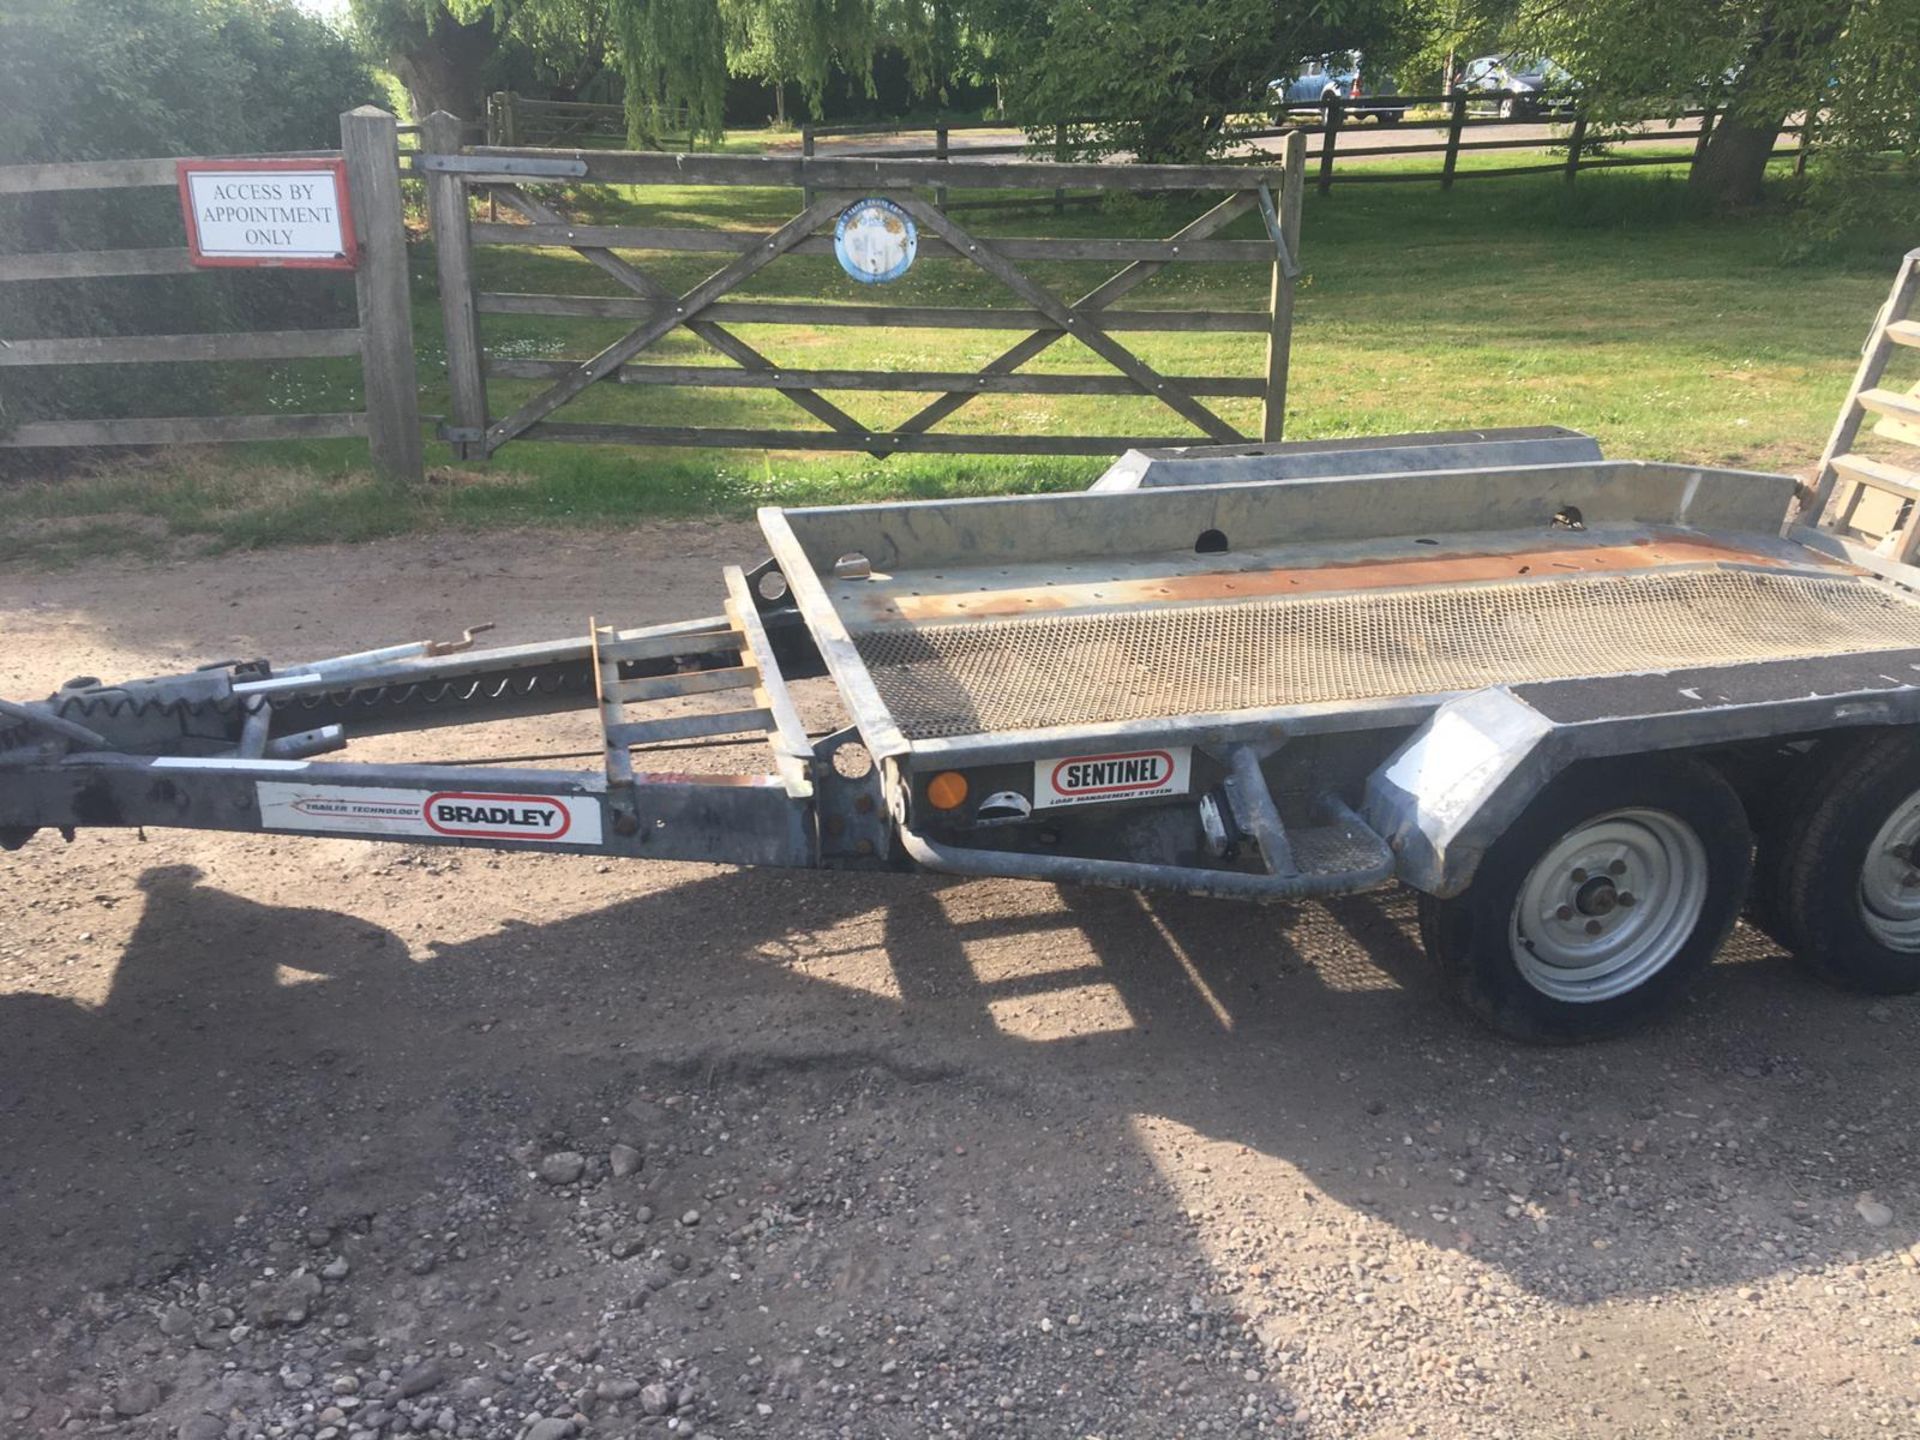 BRADLEY 2.6 ton TWIN AXLE PLANT TRAILER, ALL BRAKES TESTED AND HUBS GREASED, LIGHTS WORK *PLUS VAT* - Image 6 of 7